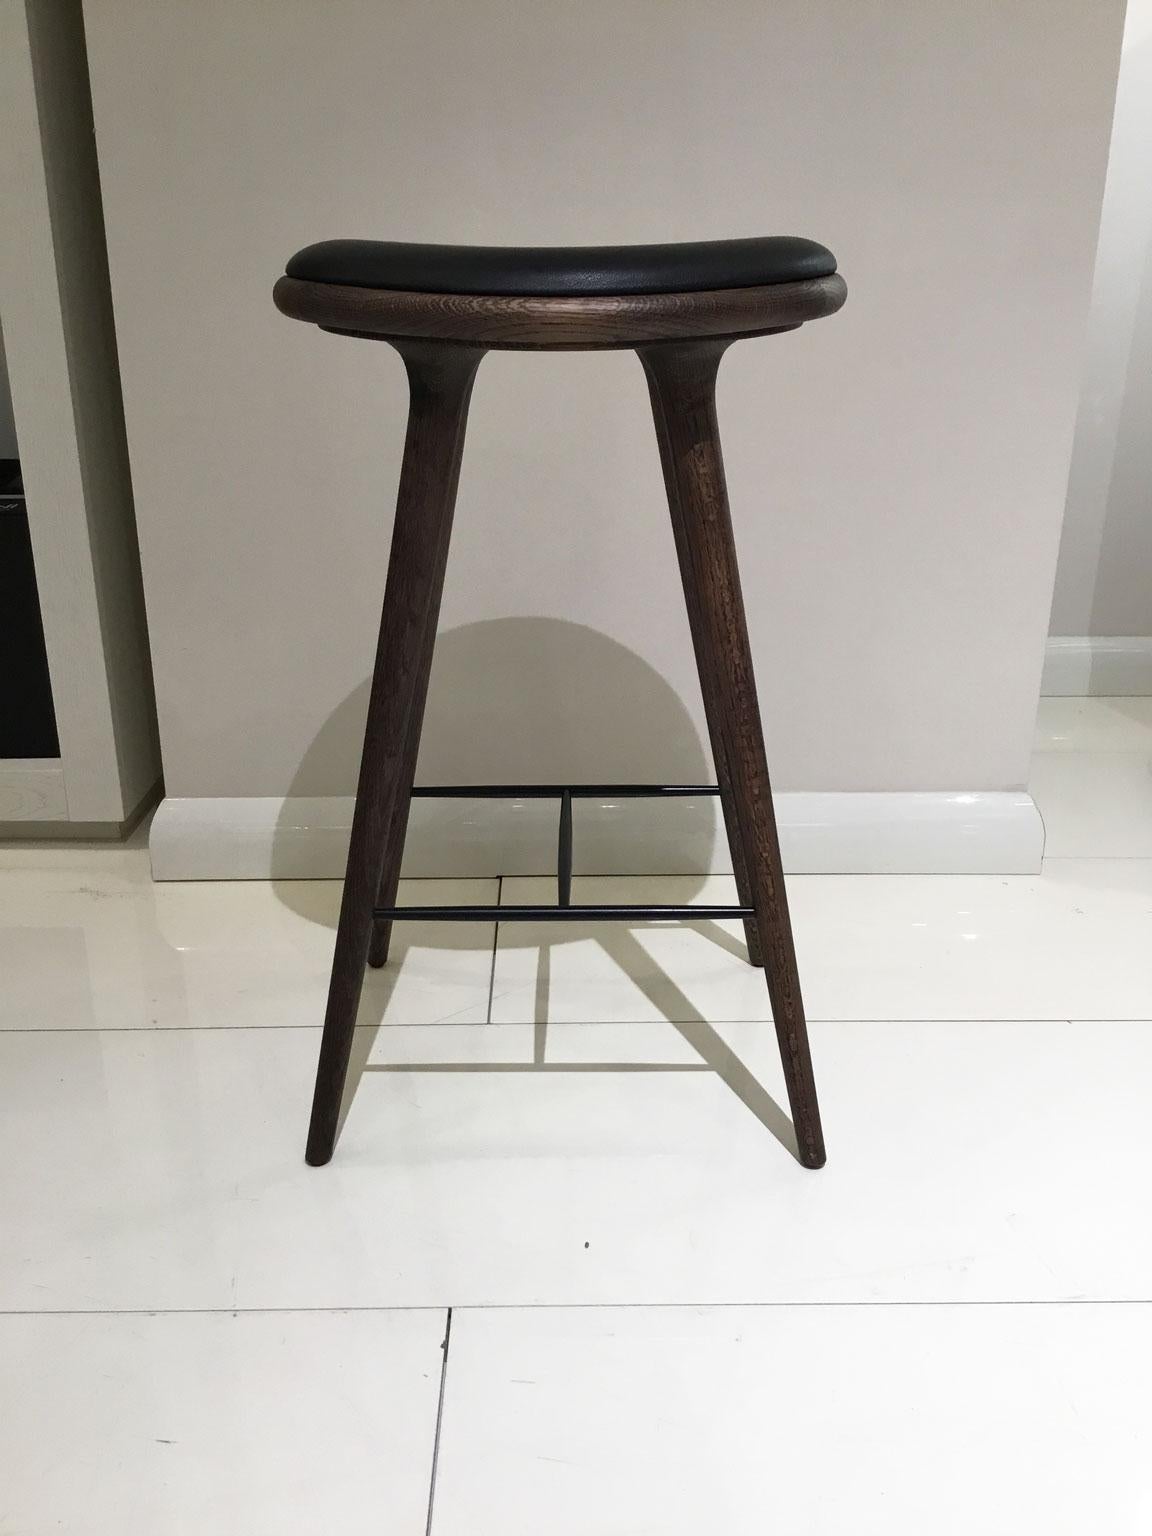 The Mater High stool is designed by the Danish architect duo Space Copenhagen and is regarded as a New Danish Classic. With its organic yet minimalist style, this bar stool is suitable for both residential and commercial use. The wood is FSC